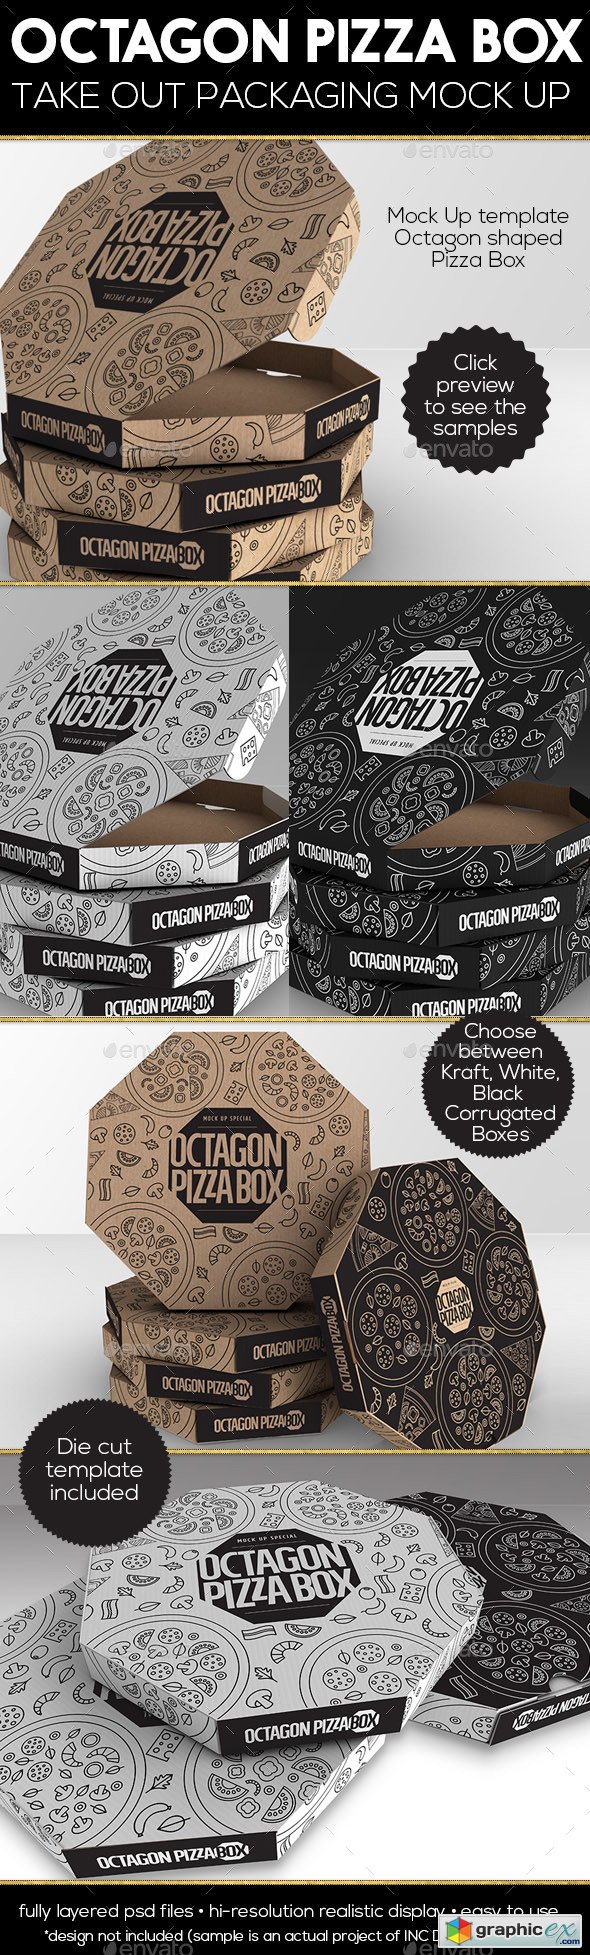 Packaging Mock up Octagon Pizza Box